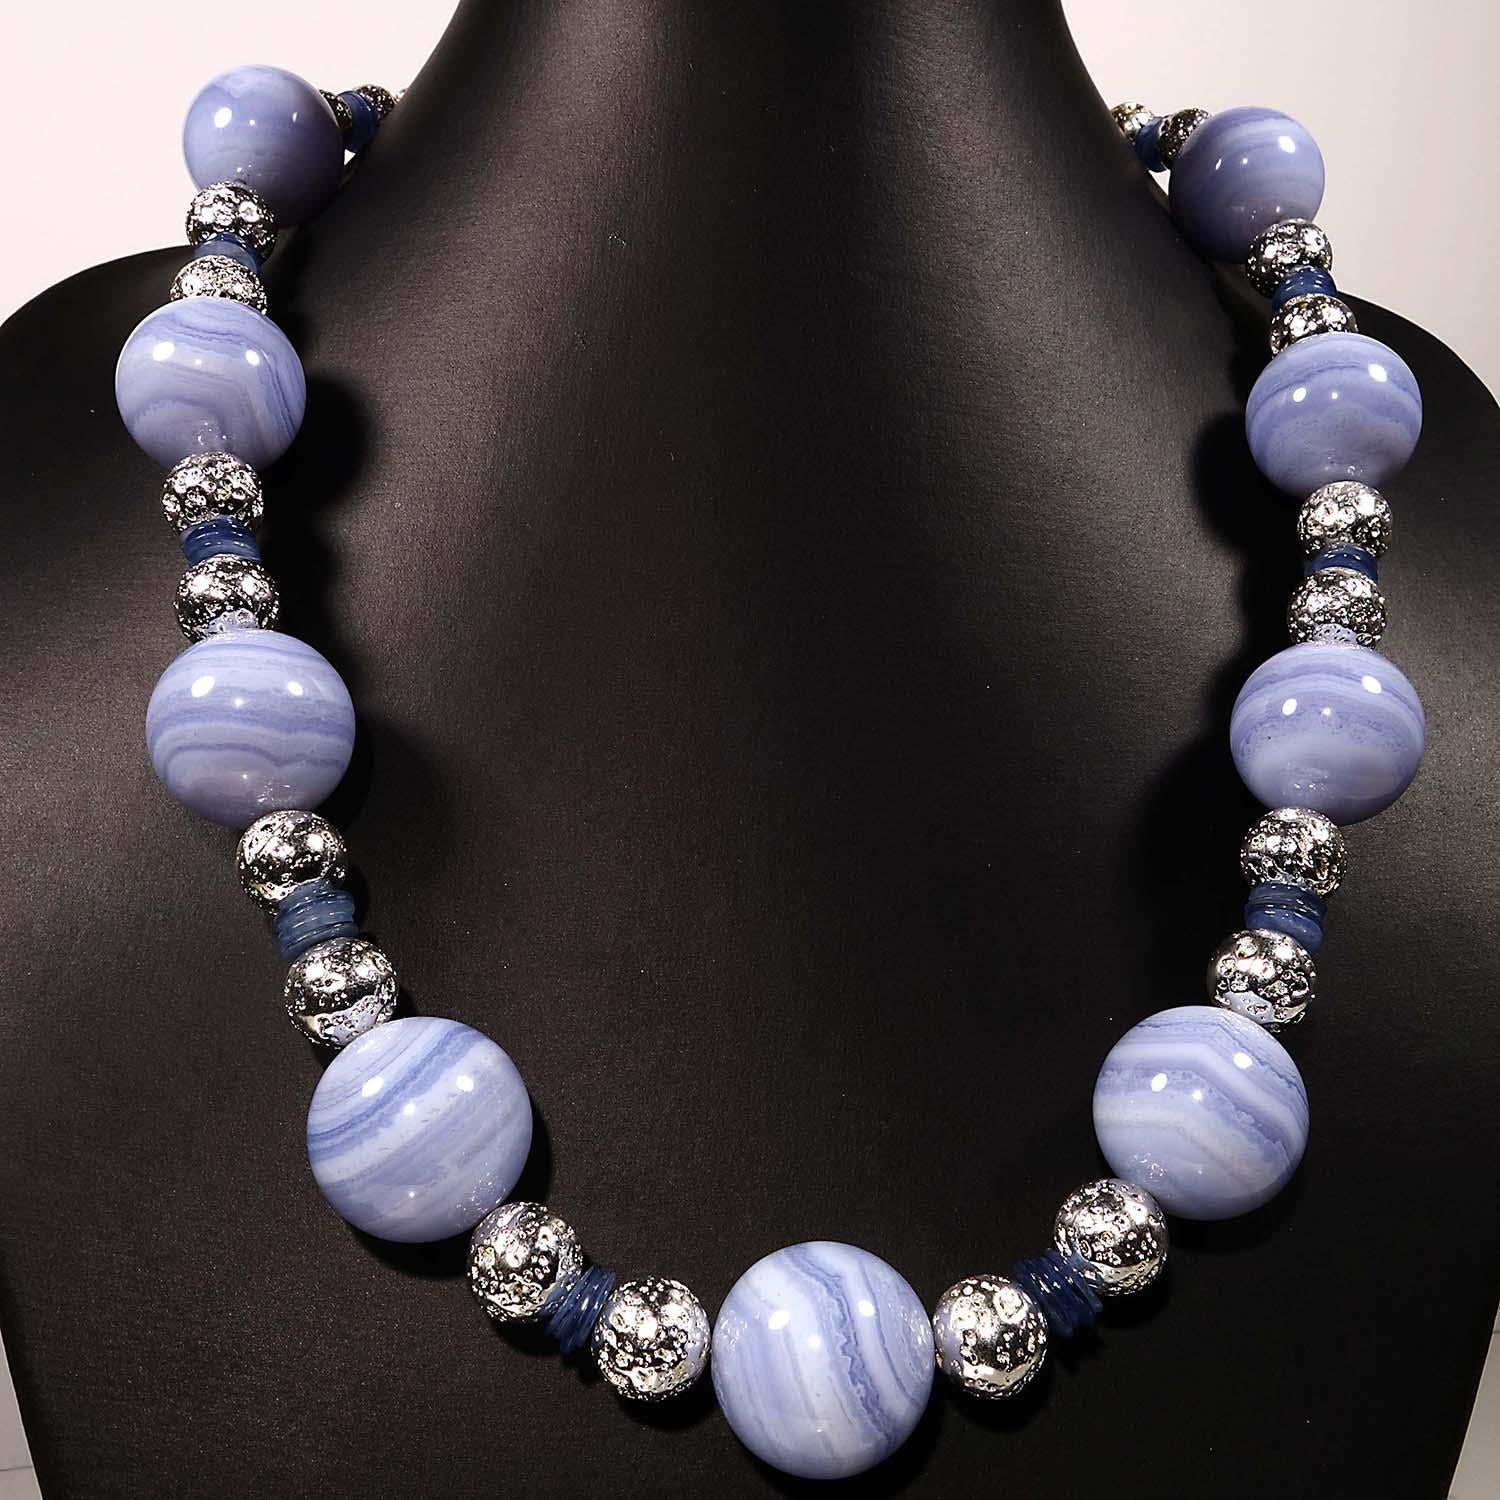 Custom made, 20 inch necklace with large Blue Lace Agate stations accented with Silver lava rock and thin slices of Kyanite.  This one of a kind necklace will enhance whatever you.  This lovely necklace is secured with a Silver toggle clasp.  See